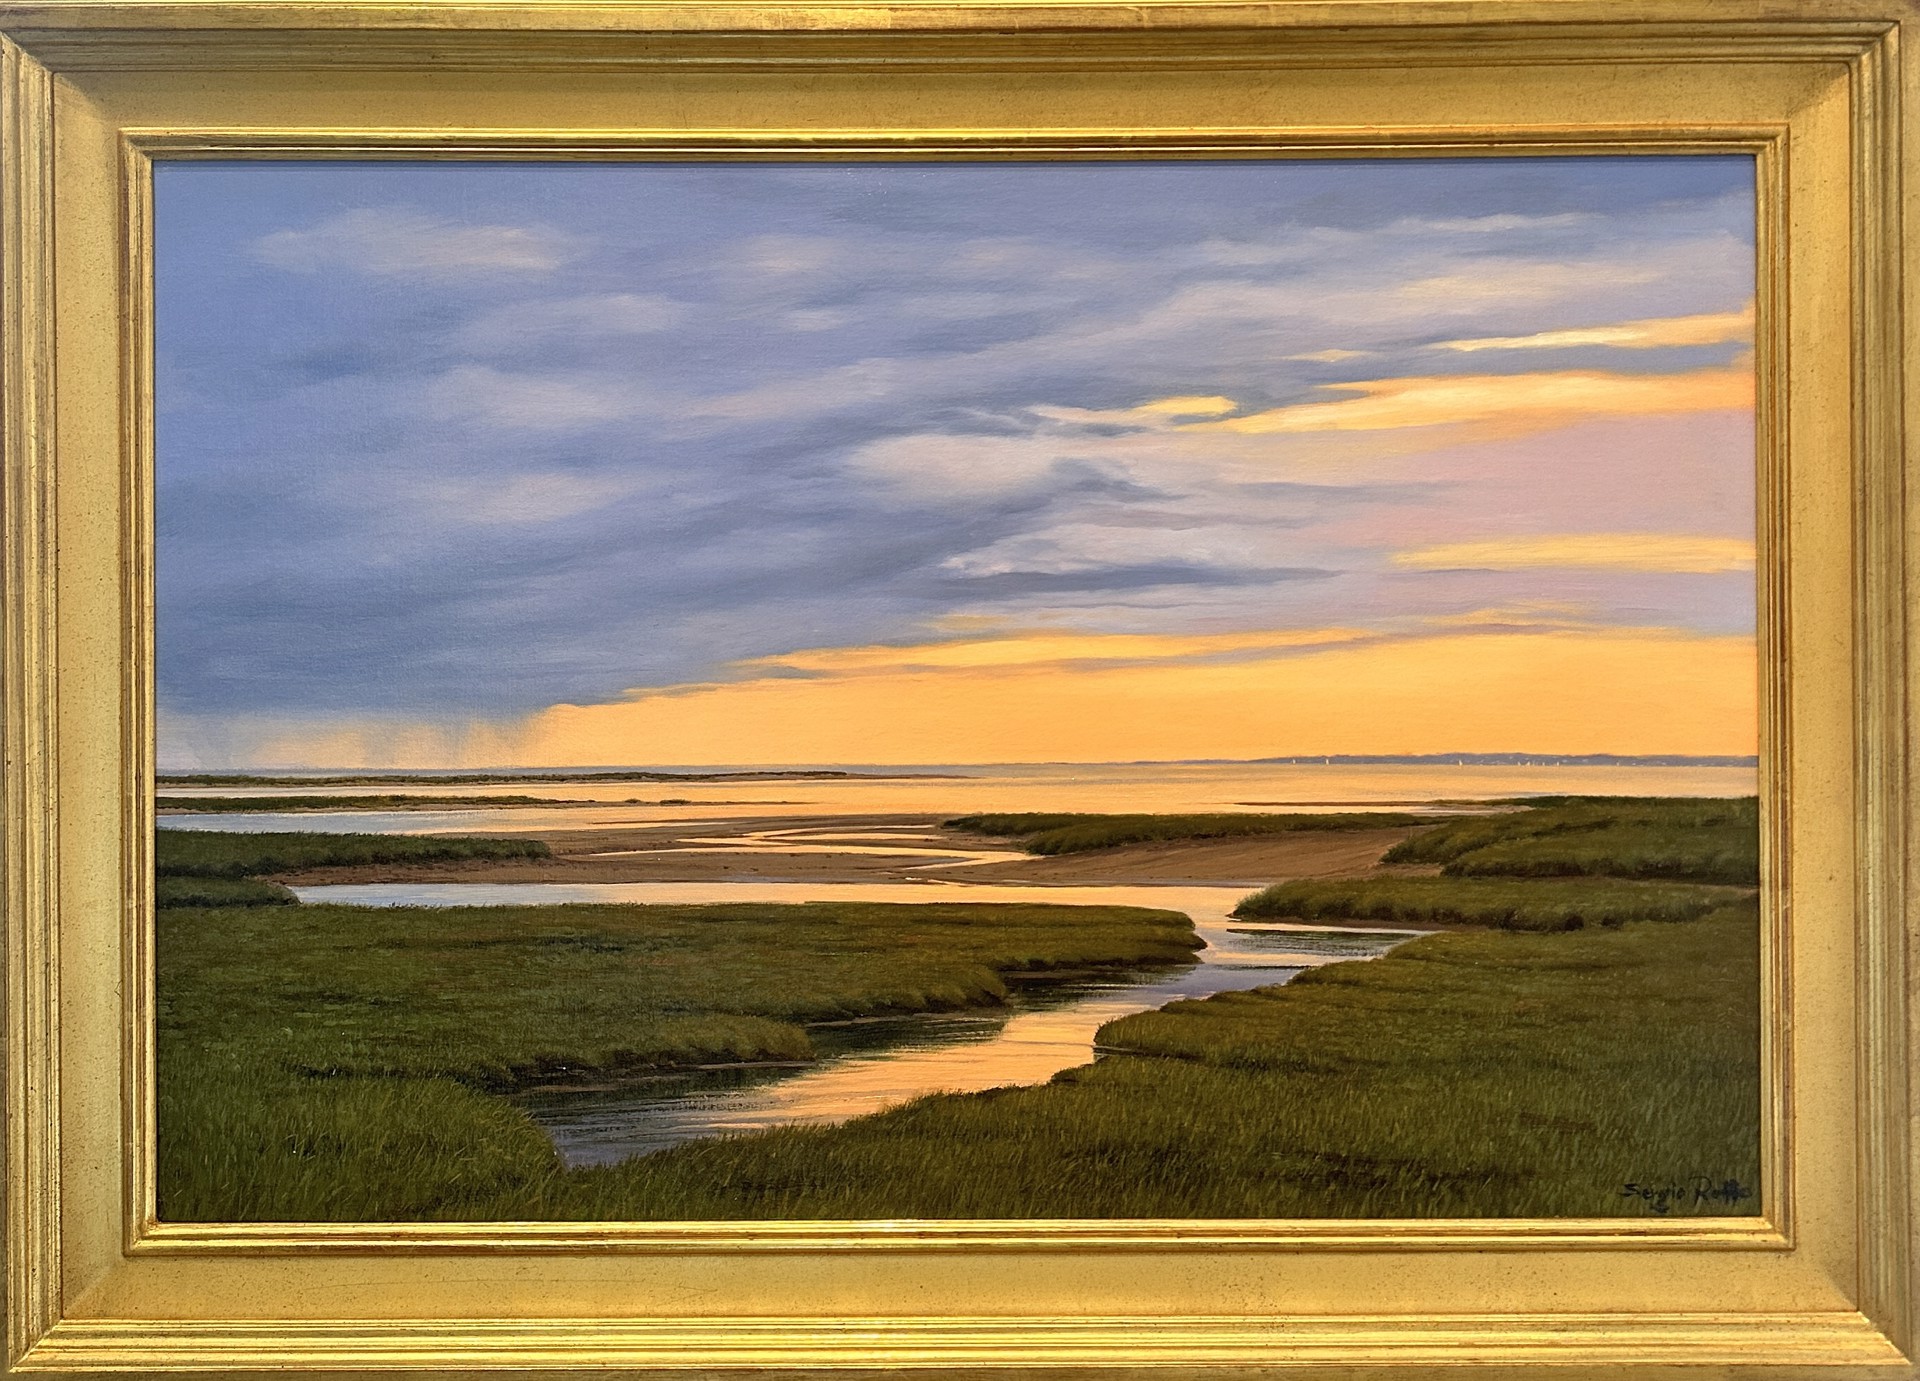 Nantucket Sunset, Polpis by Sergio Roffo